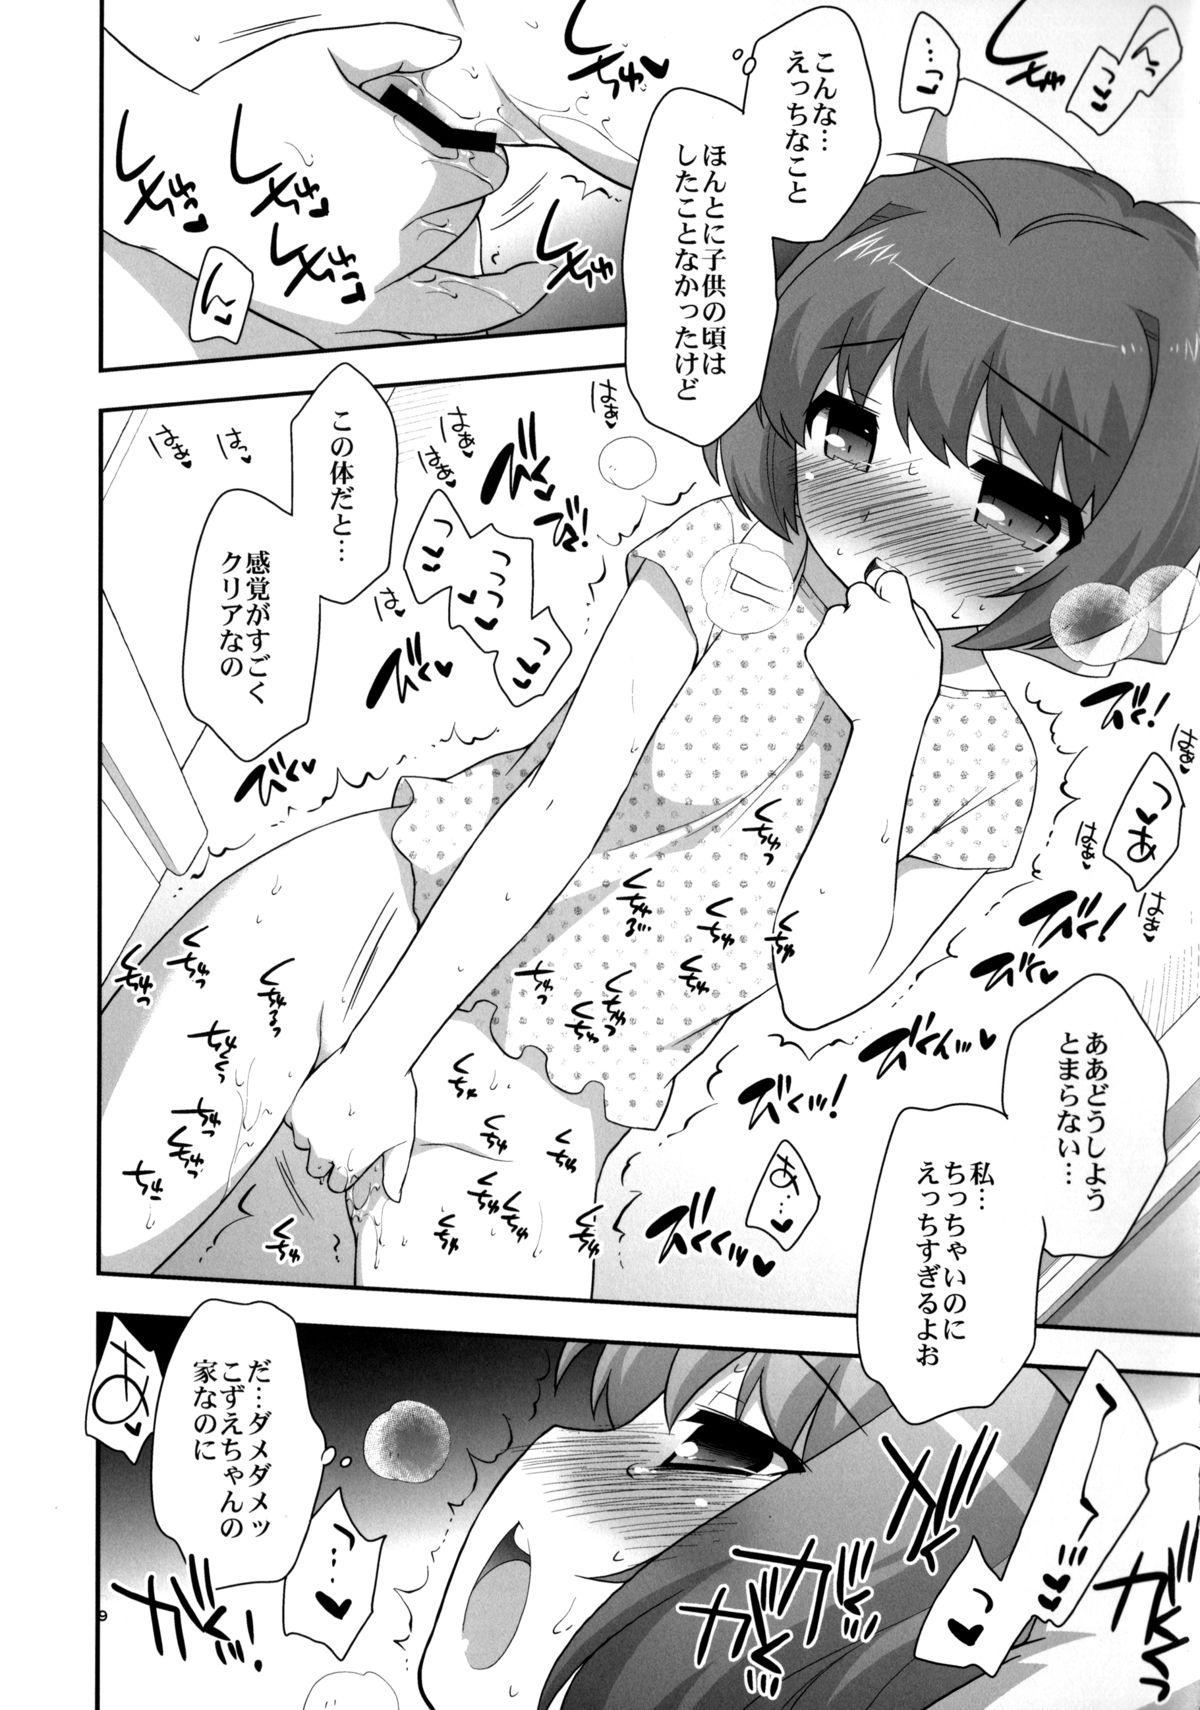 Petite Porn Marorara - The world god only knows Ink - Page 8